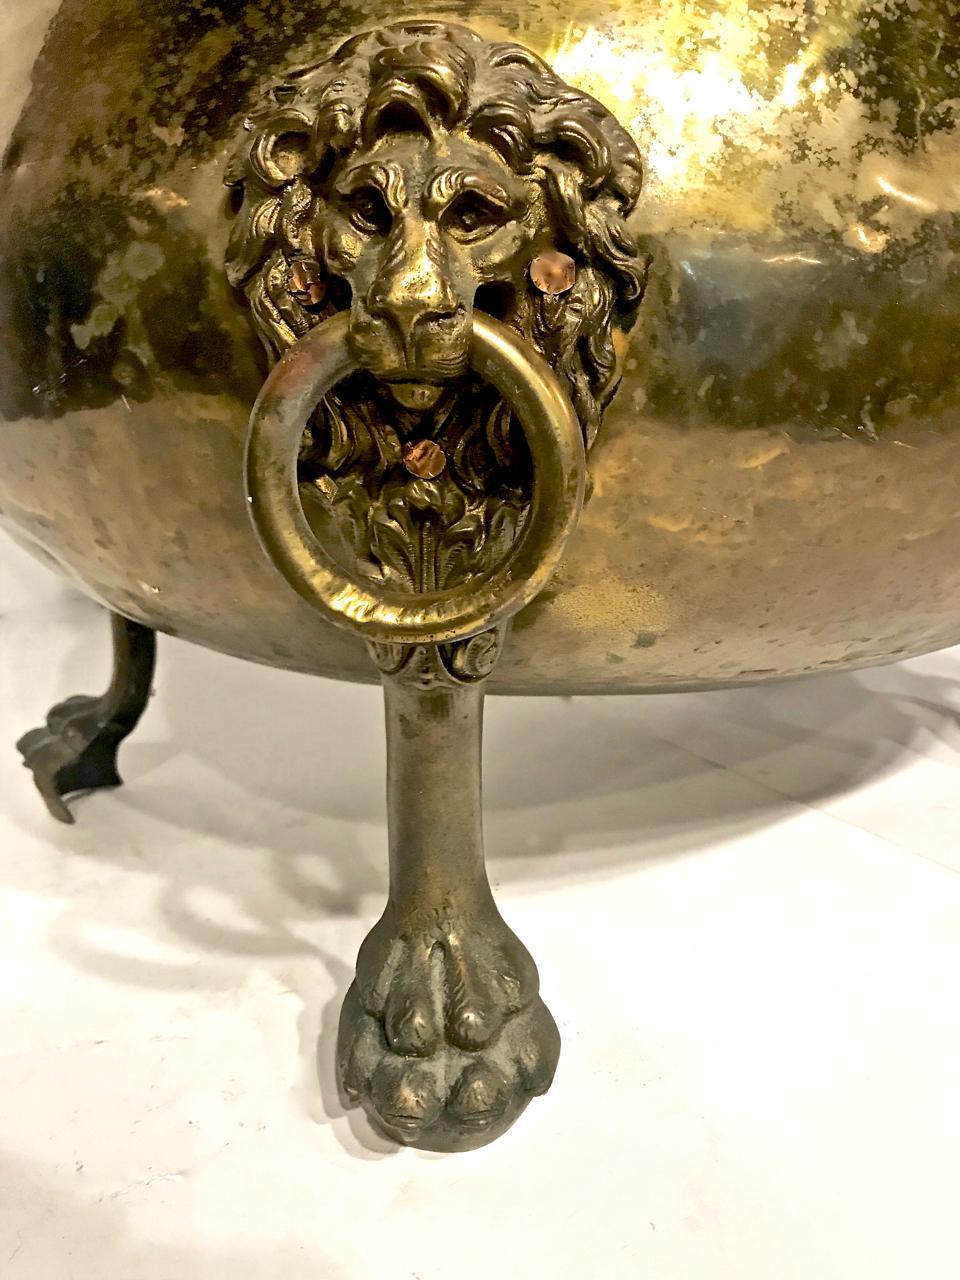 This is an unusually large 19th century. Solid brass log bin that is detailed with finely elaborated lion mask handles and paw feet. This vessel would be a distinctive towel holder for a gentleman's bathroom, as well as a planter or elegant catchall.